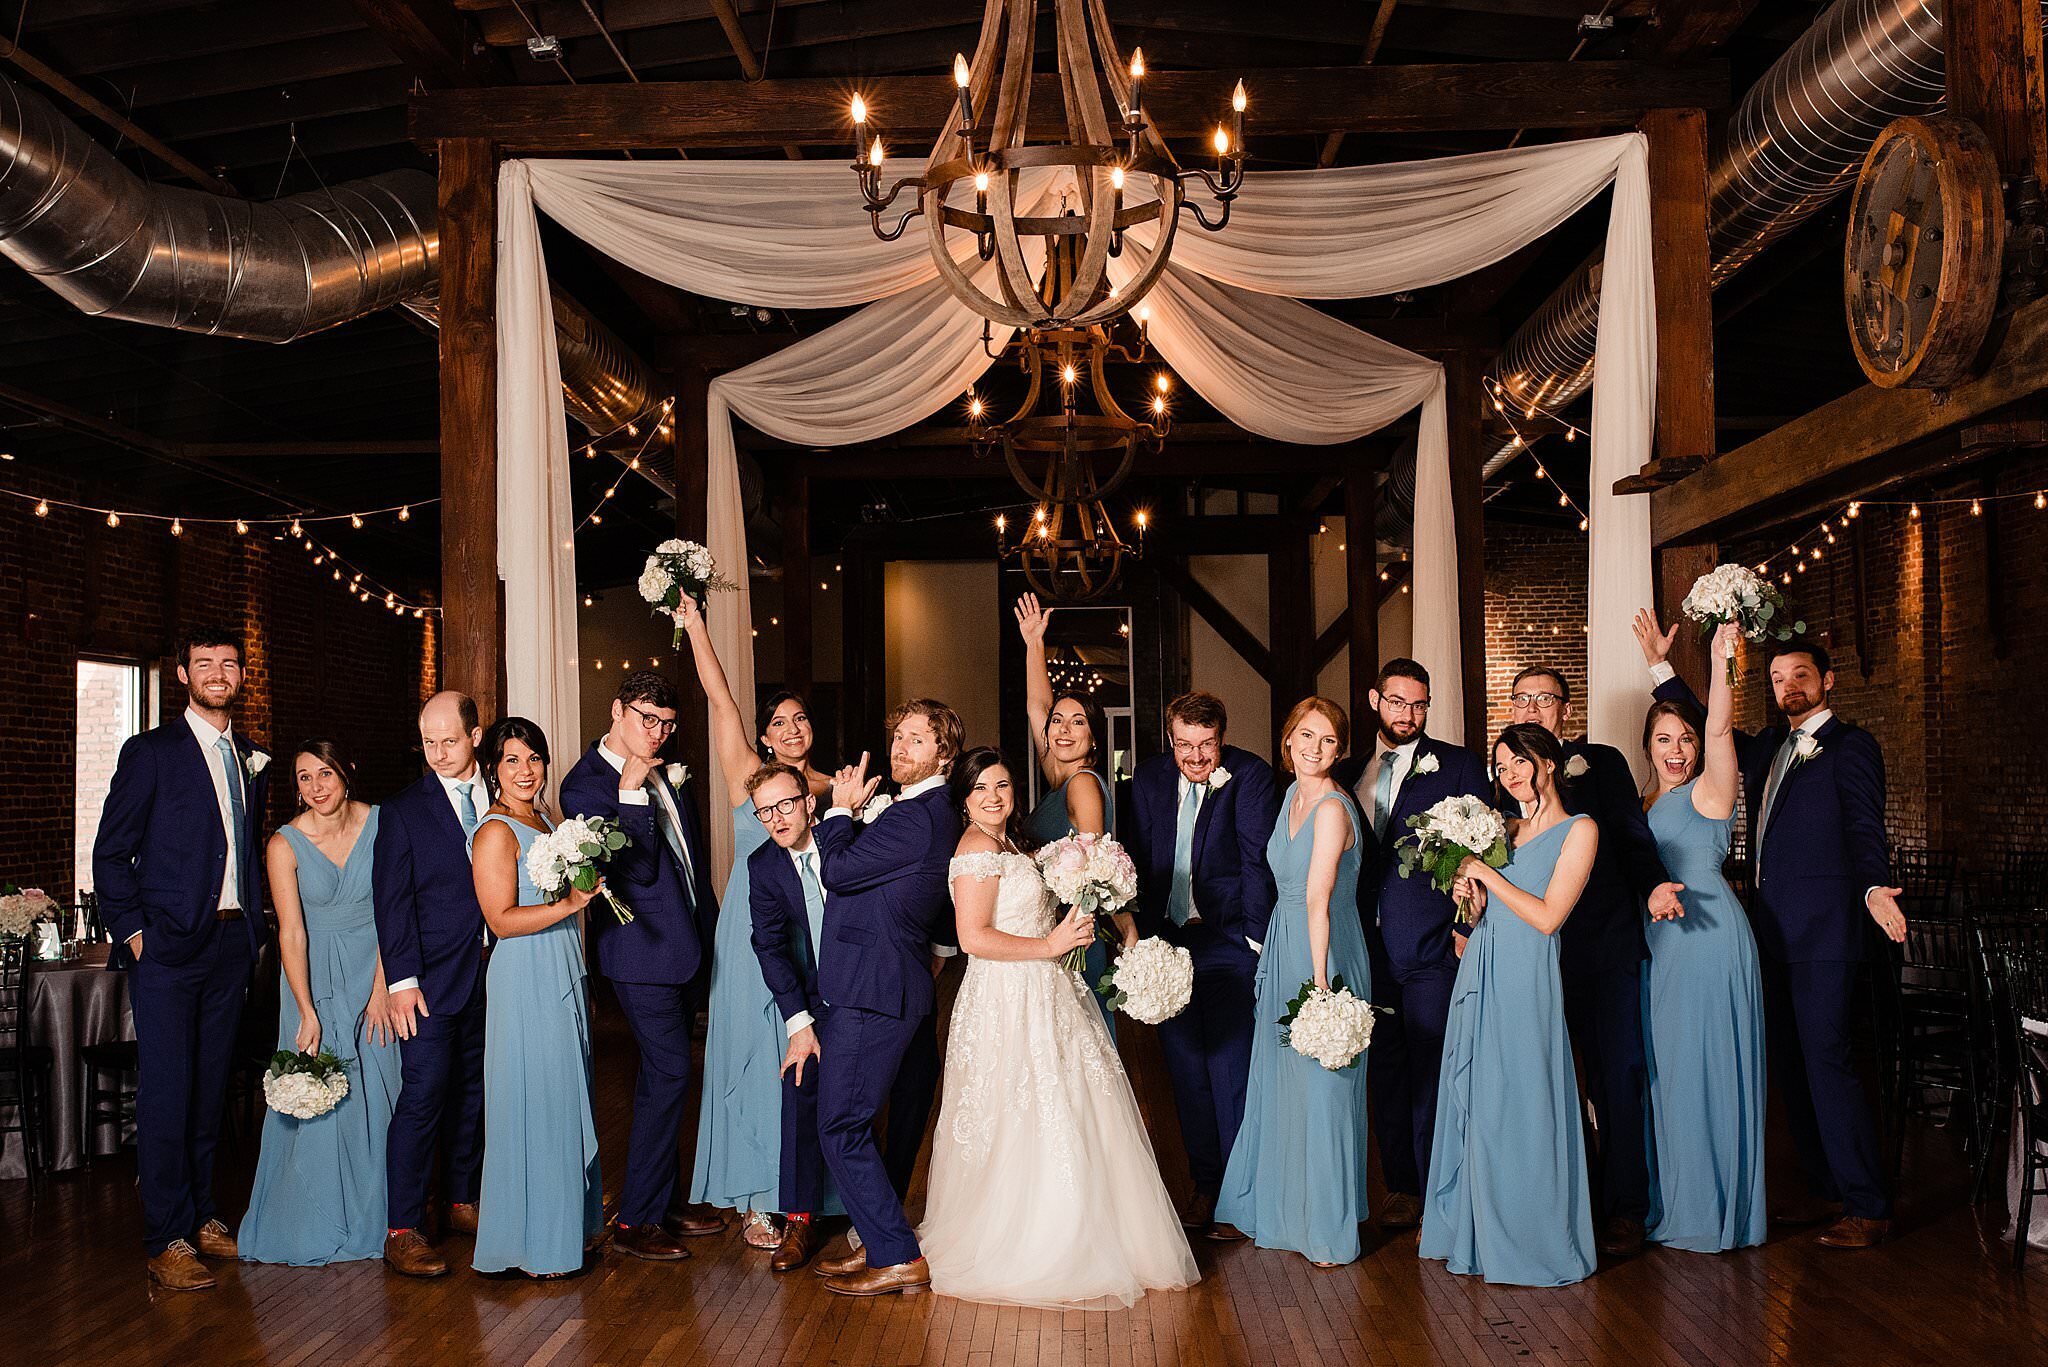 Wedding party wearing shade of blue standing together celebrating the newlyweds inside the ballroom at Cannery ONE with draping and chandeliers above